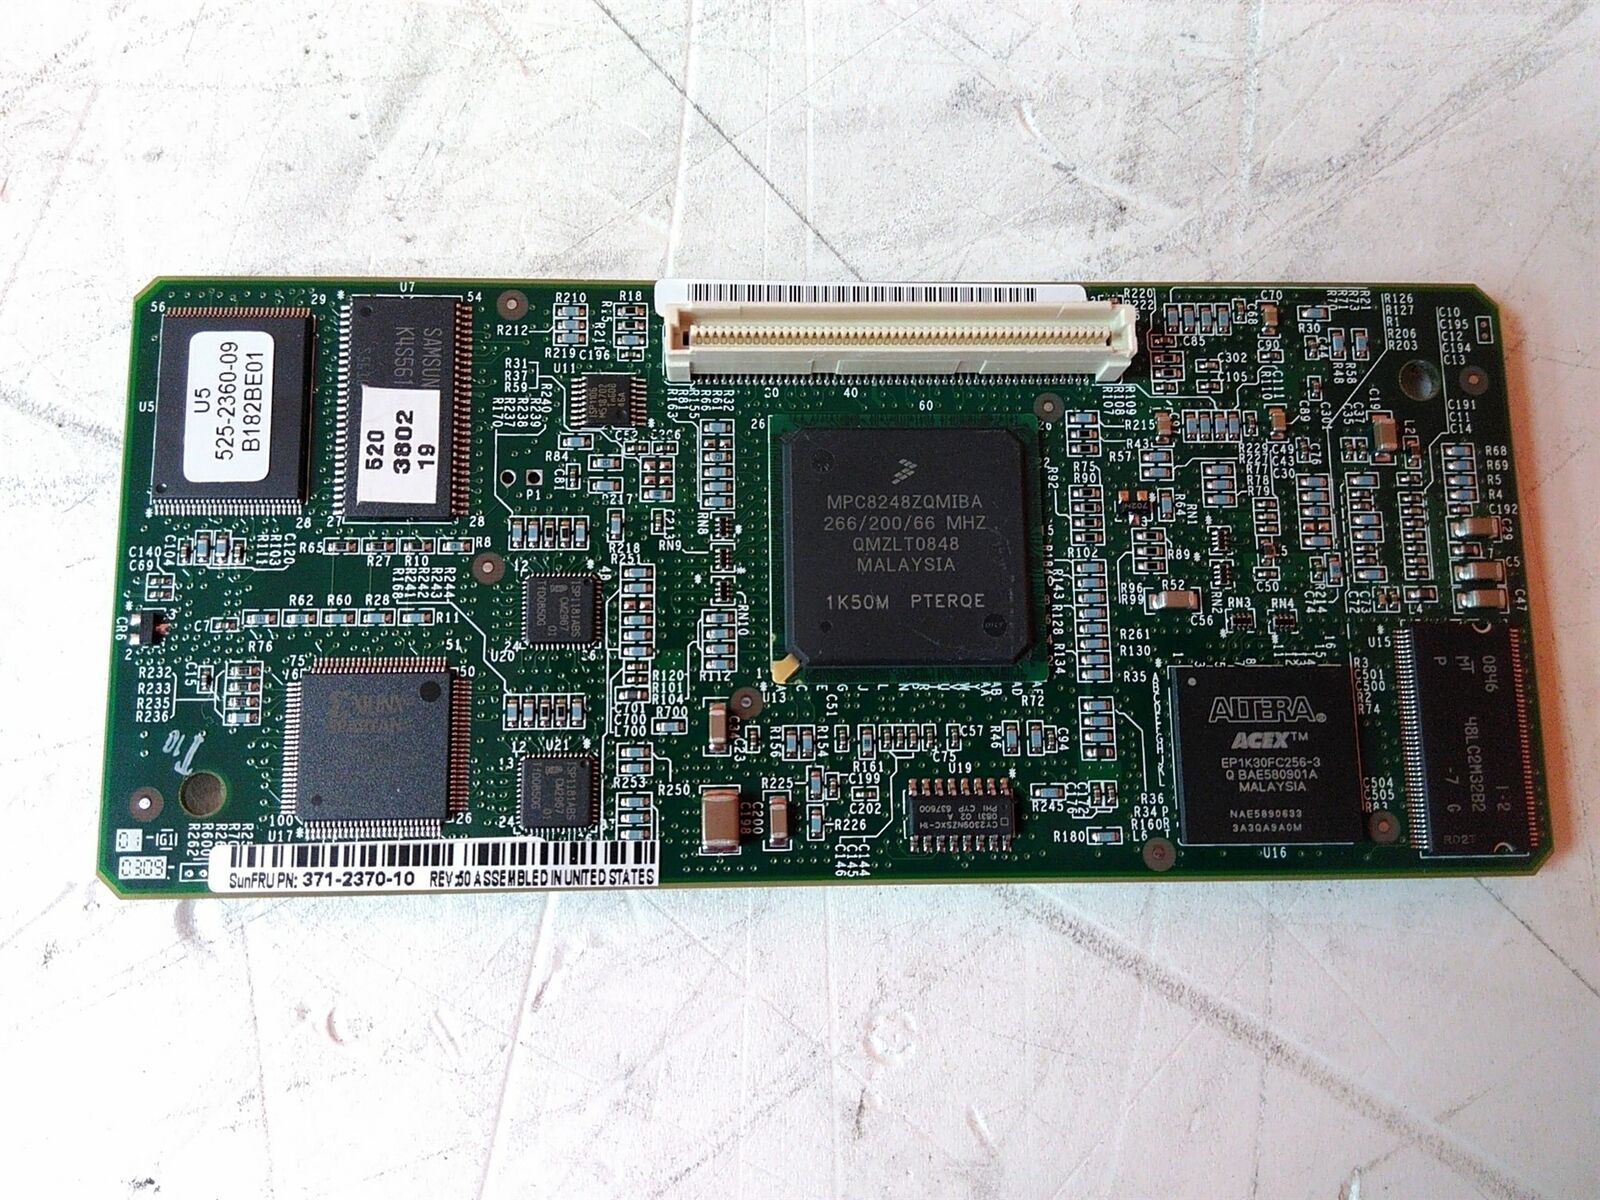 Defective Sun 371-2370 Processor Board AS-IS for Parts